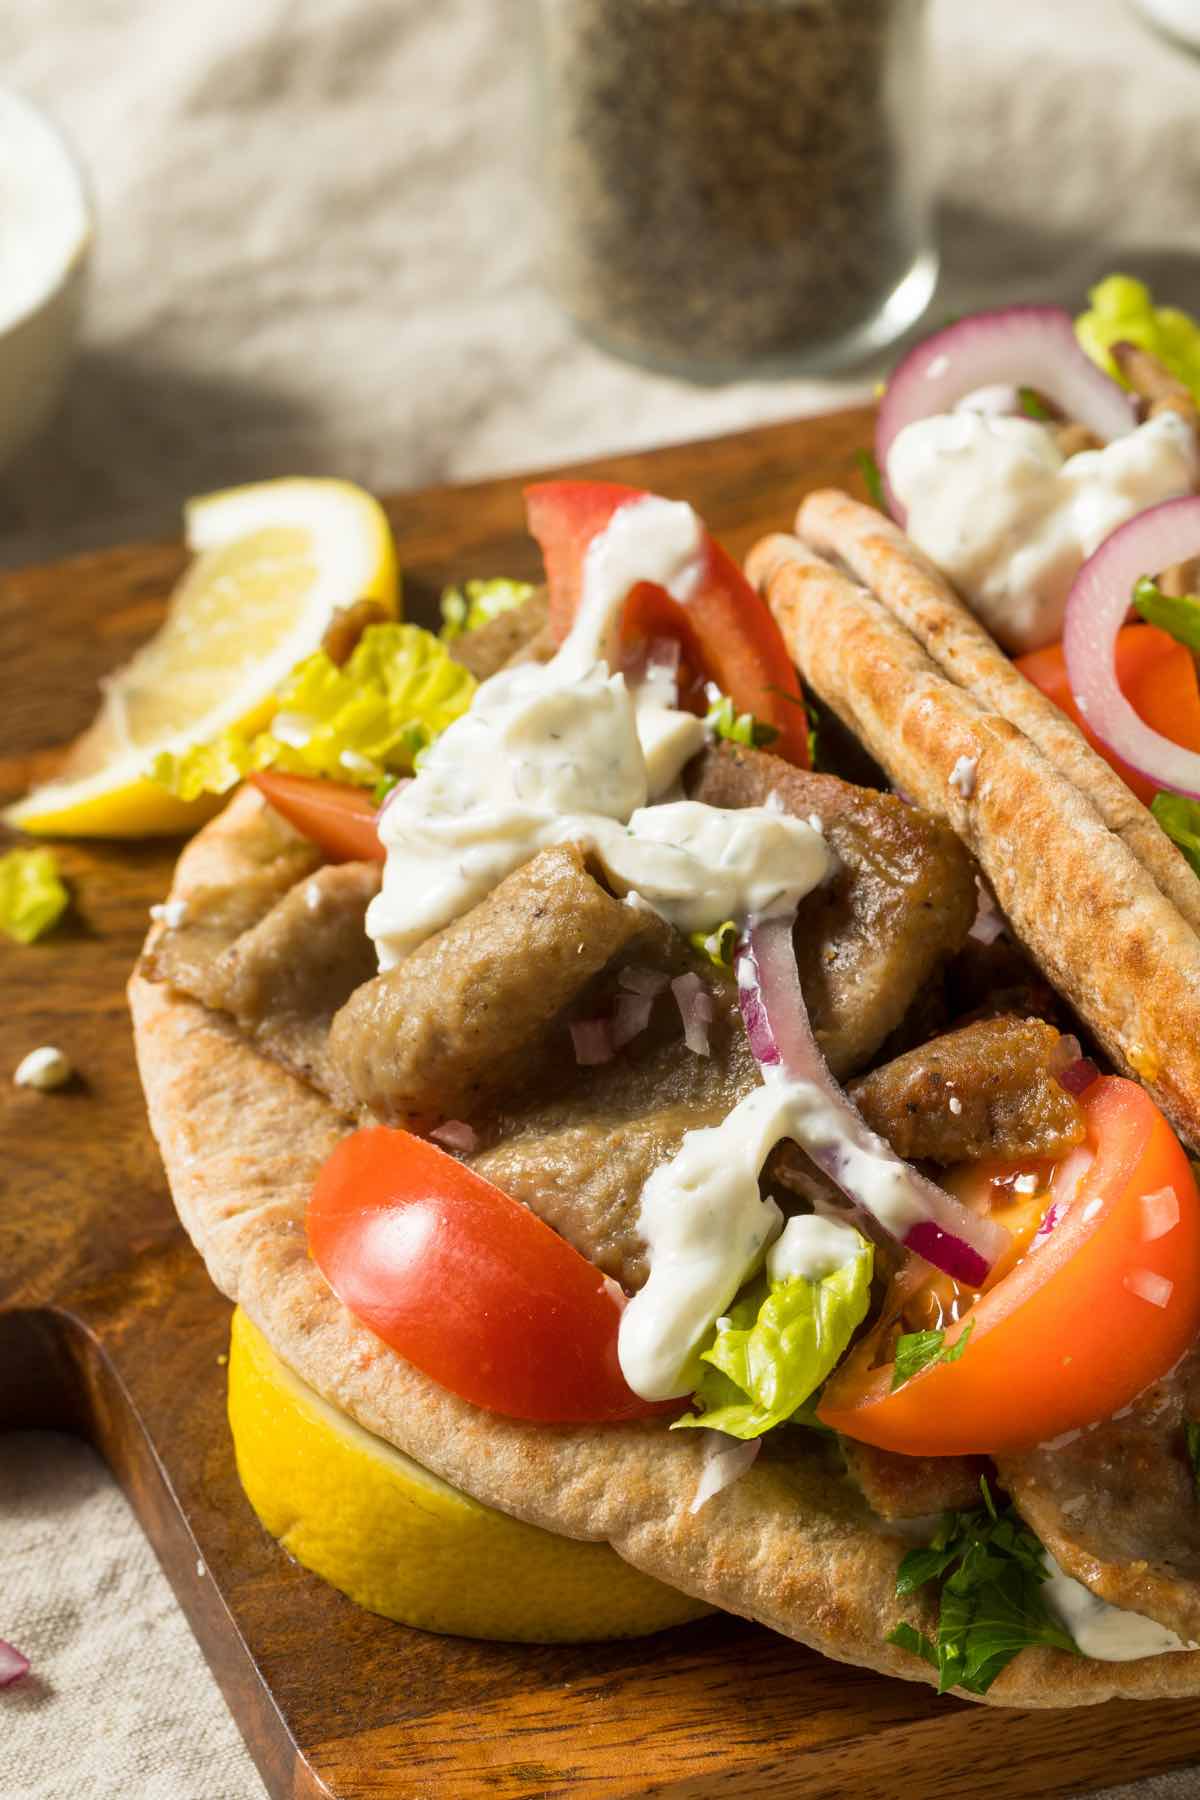 The Easy Greek Gyro Sandwich is gyro meat, fresh vegetables, and feta cheese wrapped in warm pita bread. You can top it with Tzatziki sauce, and it's the ultimate sandwich for Greek food lovers!